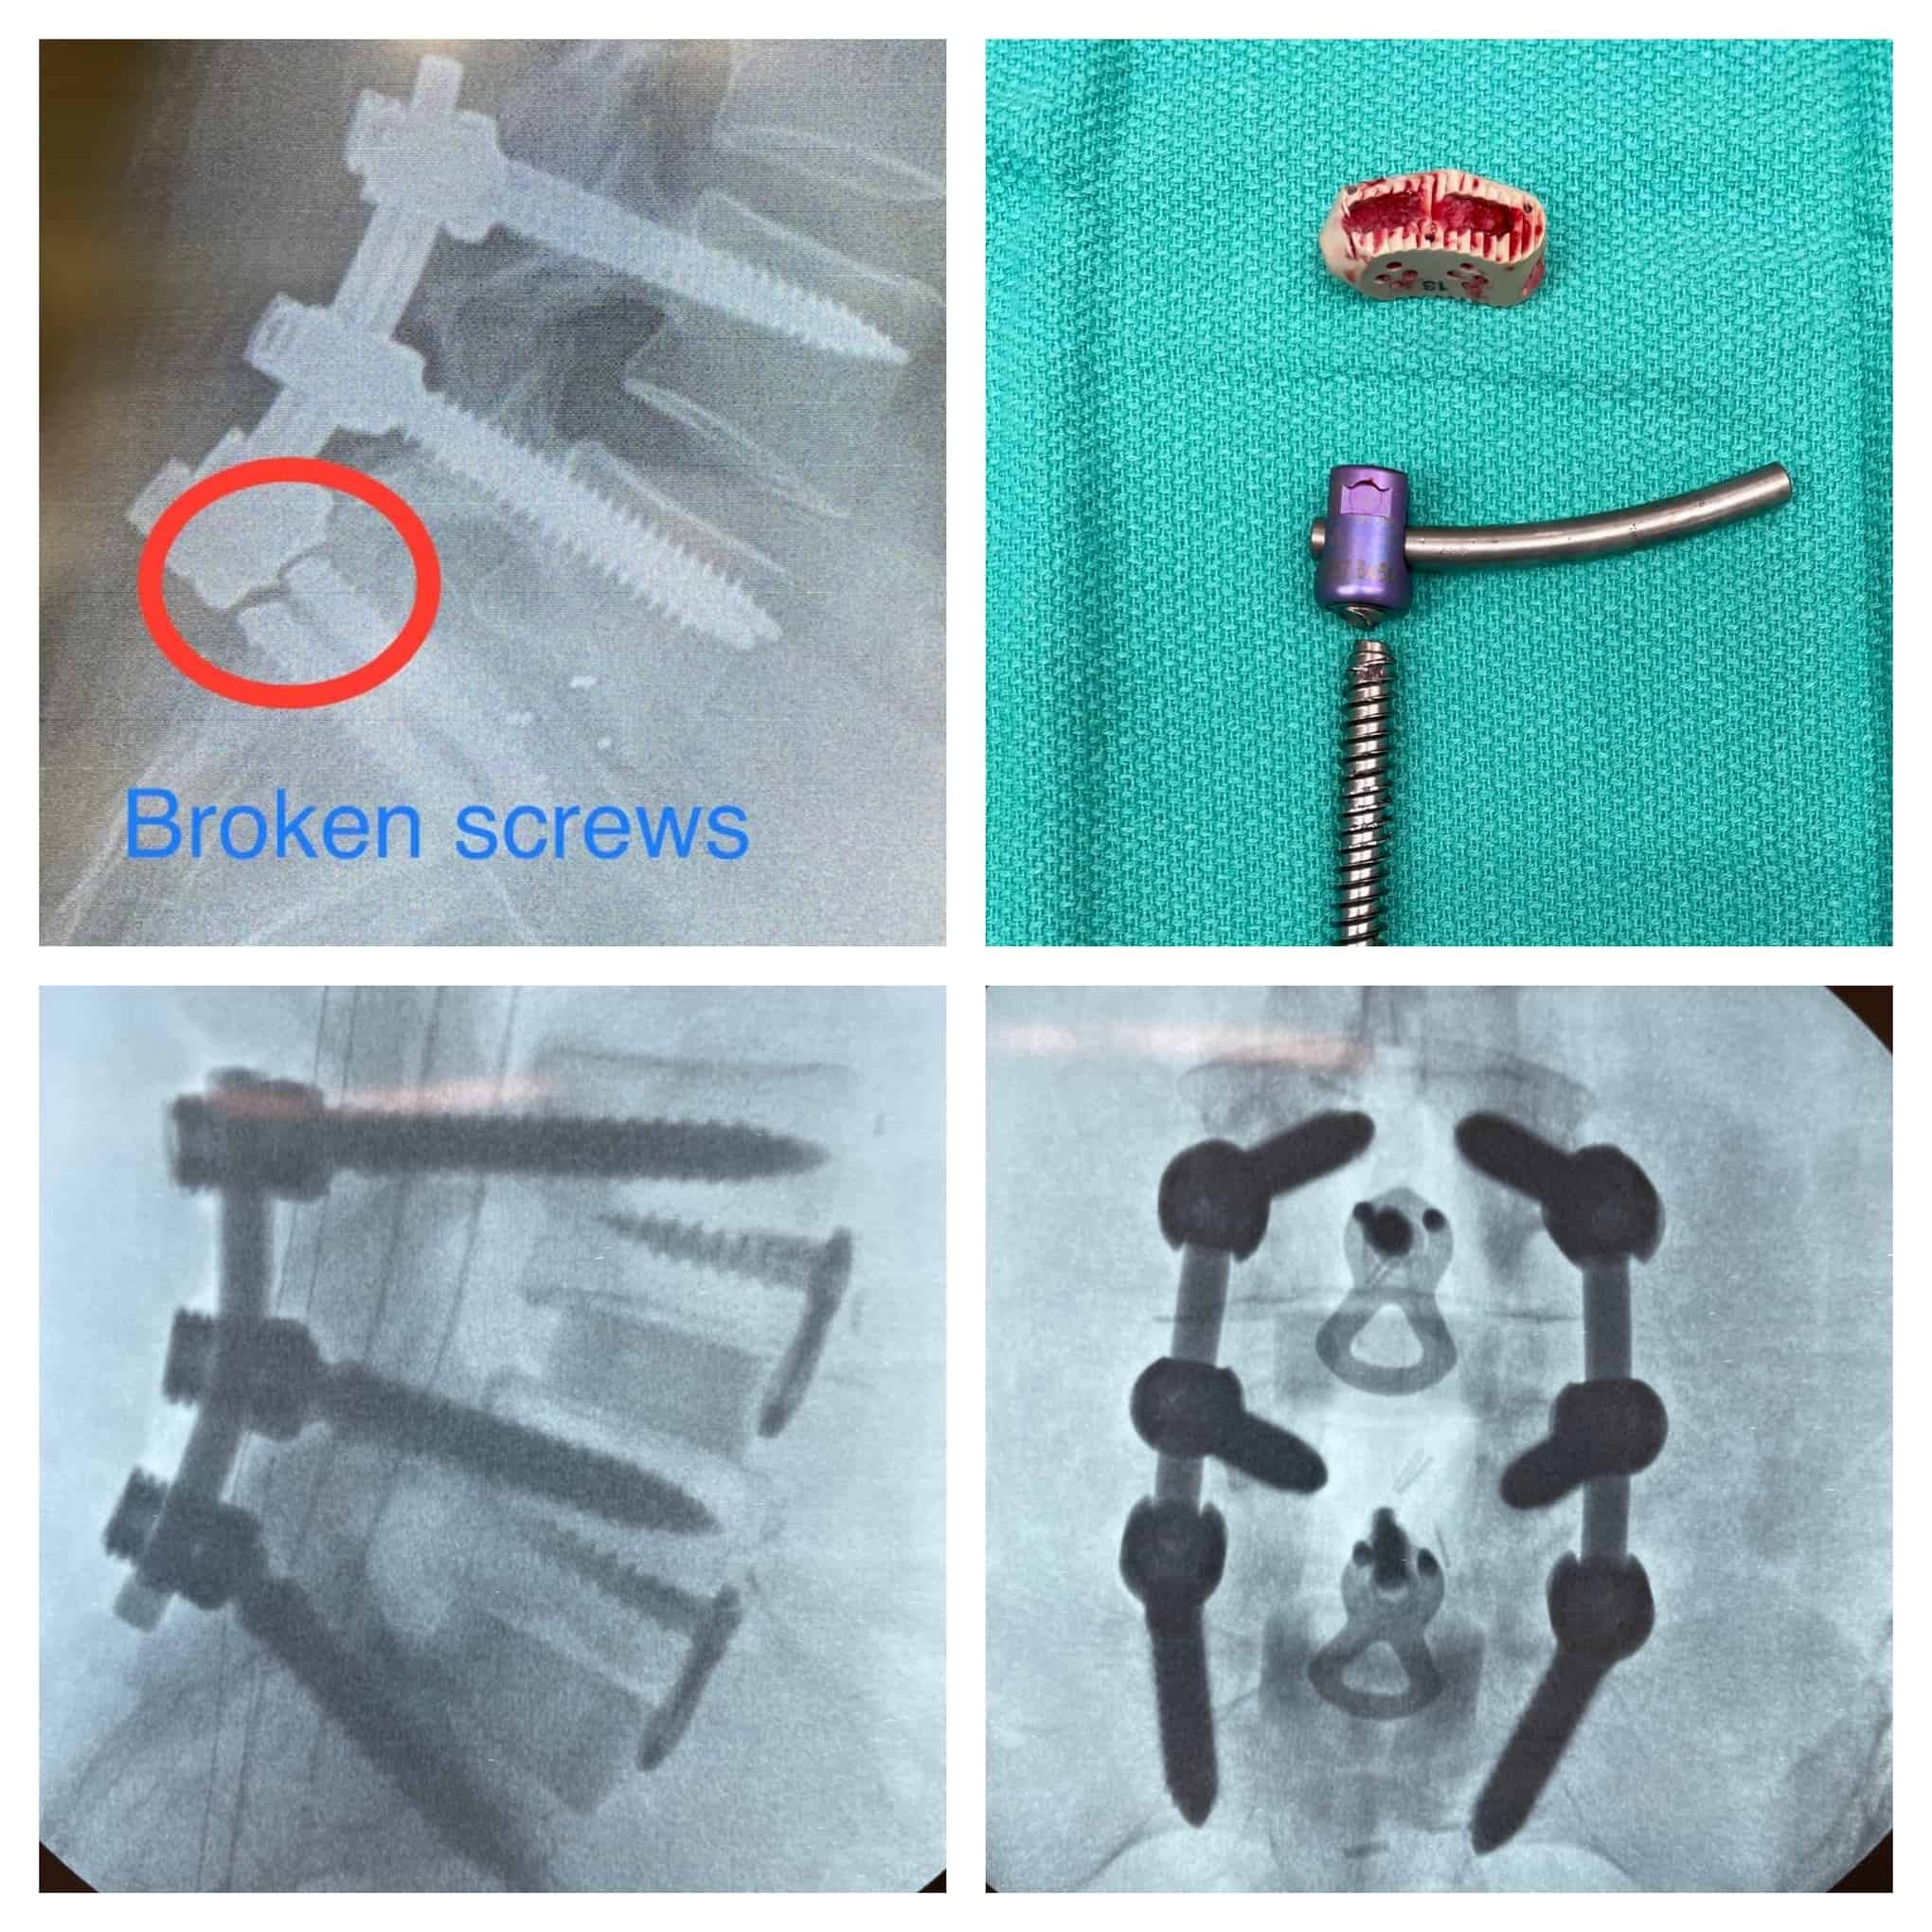 Revision Spine Surgery